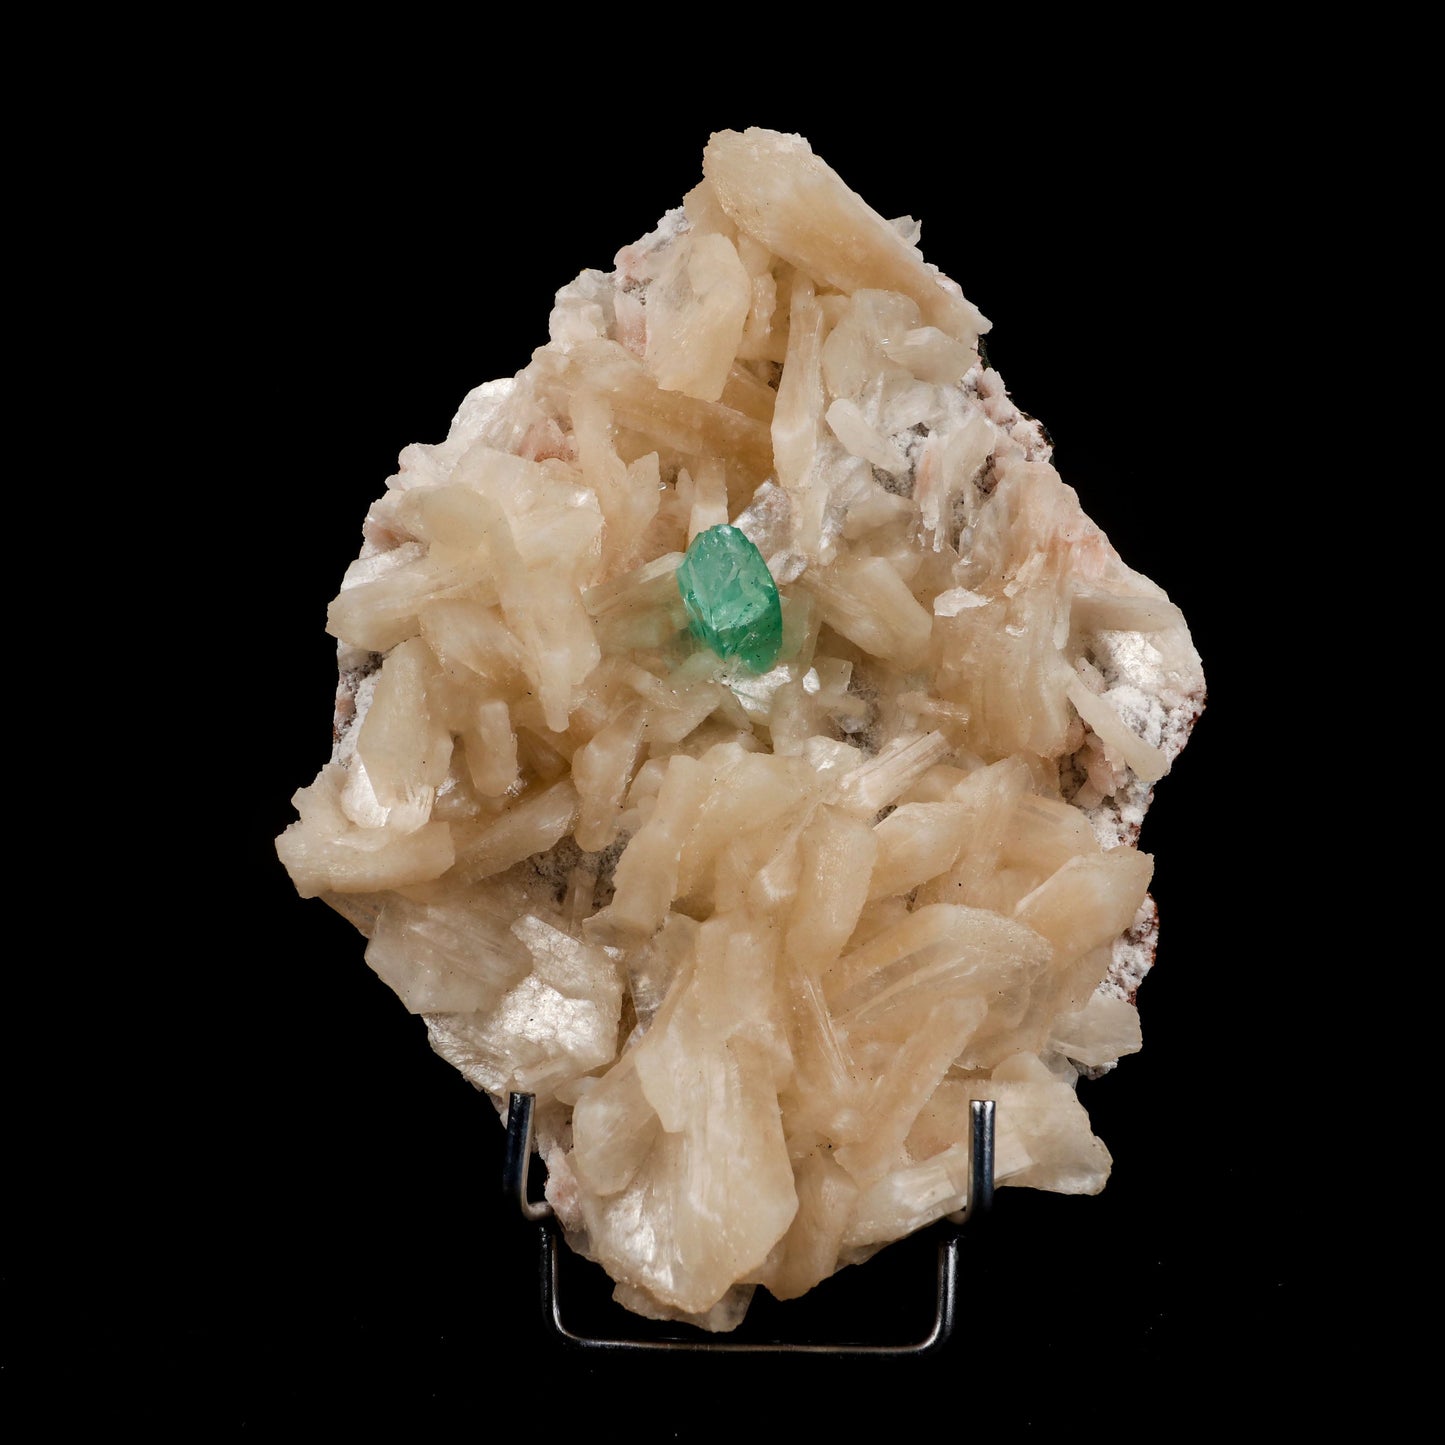 Green Apophyllite with Stilbite Natural Mineral Specimen # B 4995  https://www.superbminerals.us/products/green-apophyllite-with-stilbite-natural-mineral-specimen-b-4995  Features:&nbsp;Transparent green apophyllite crystals long with lustrous crystal faces and steep pyramidal terminations on matrix coated with lustrous peach-baggie coloured Stilbite crystals of varying sizes. Primary Mineral(s): ApophylliteSecondary Mineral(s): StilbiteMatrix: N/A 7 Inch x 5 InchWeight : 968 